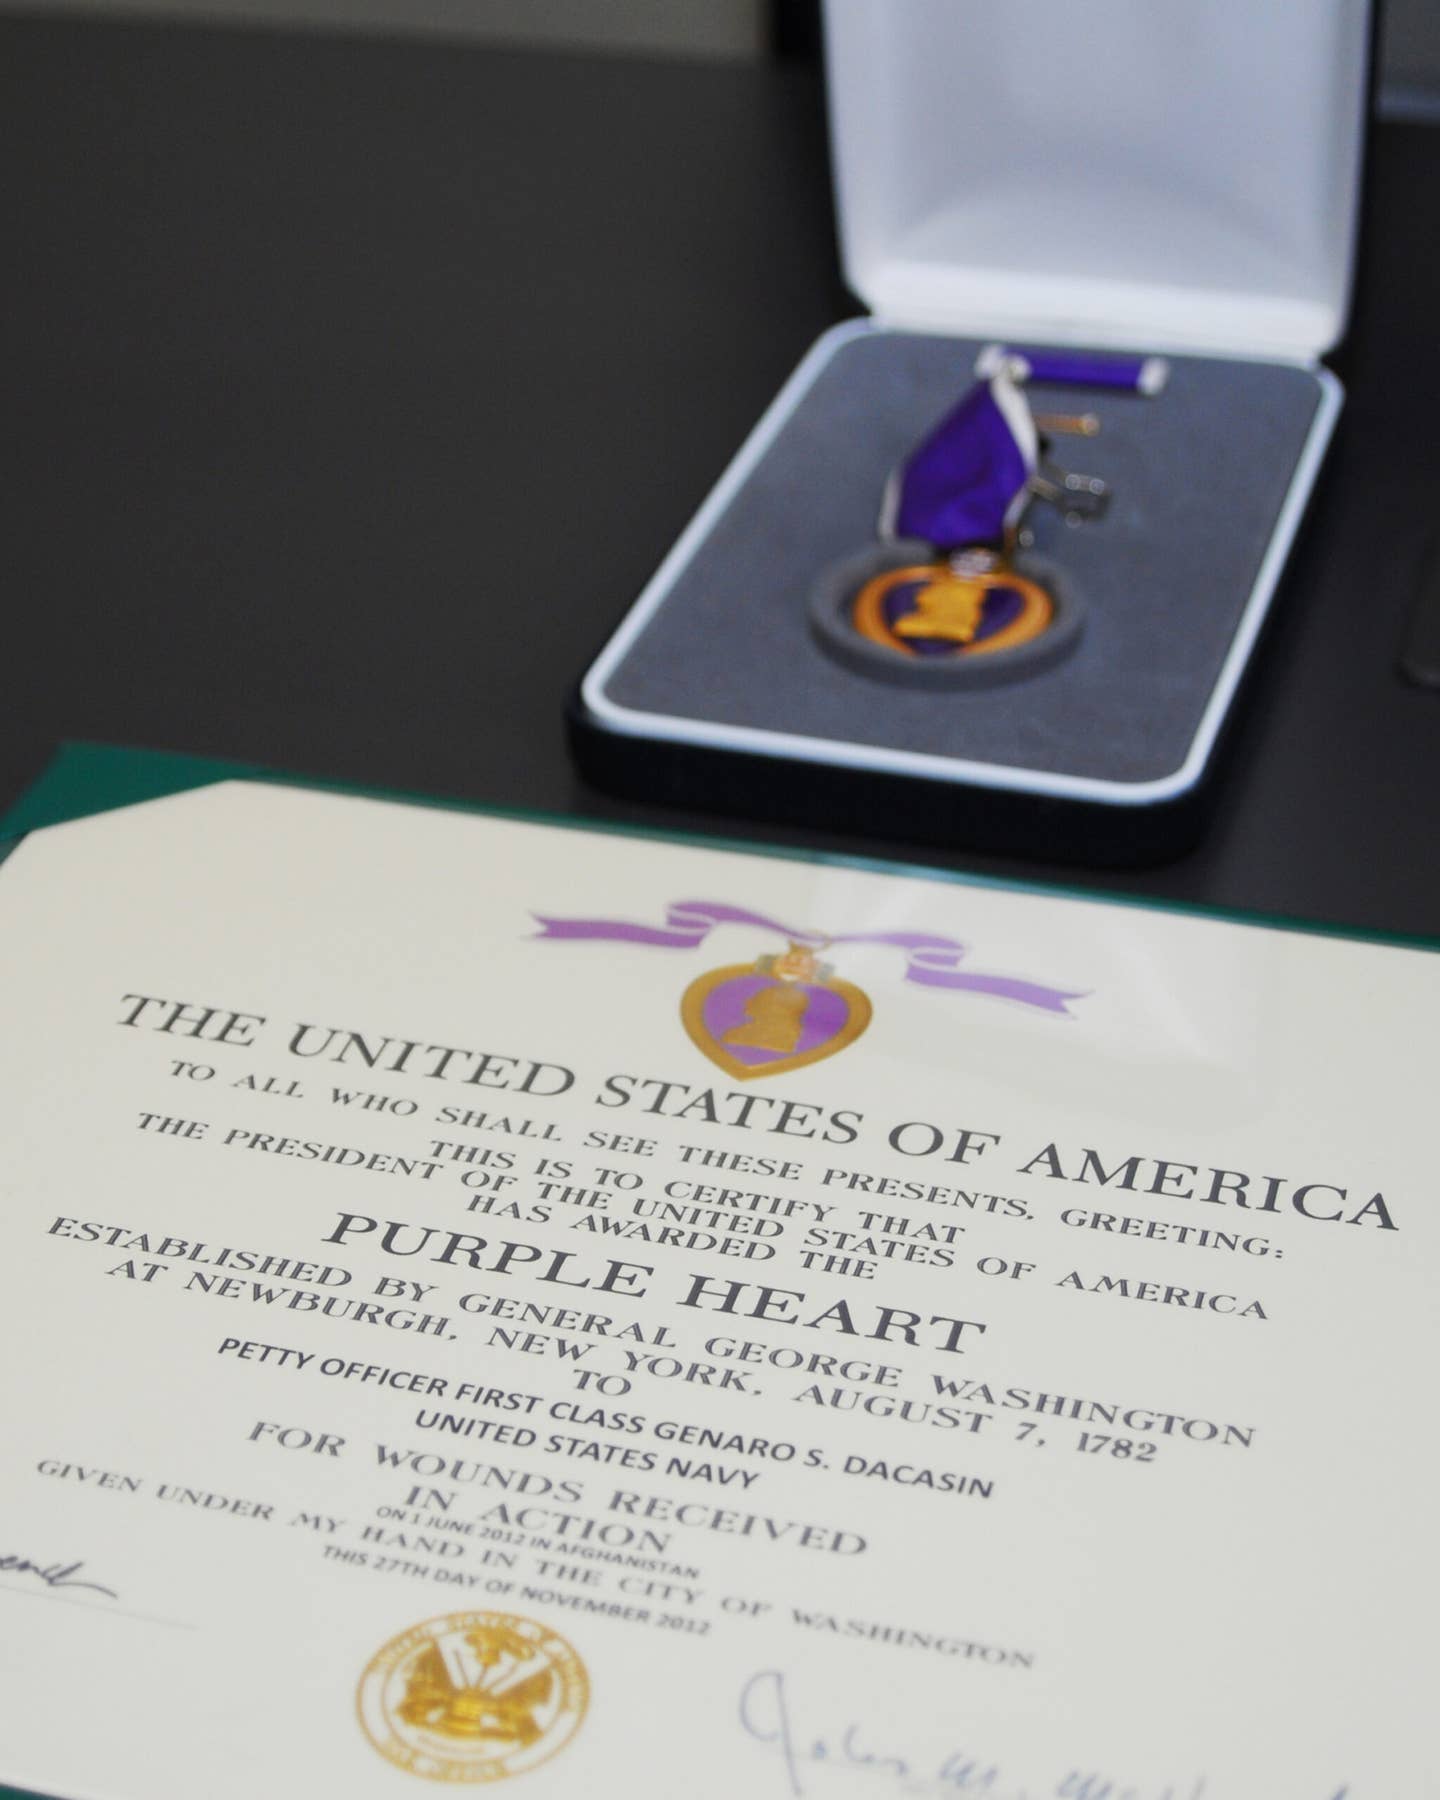 purple heart medal and citation